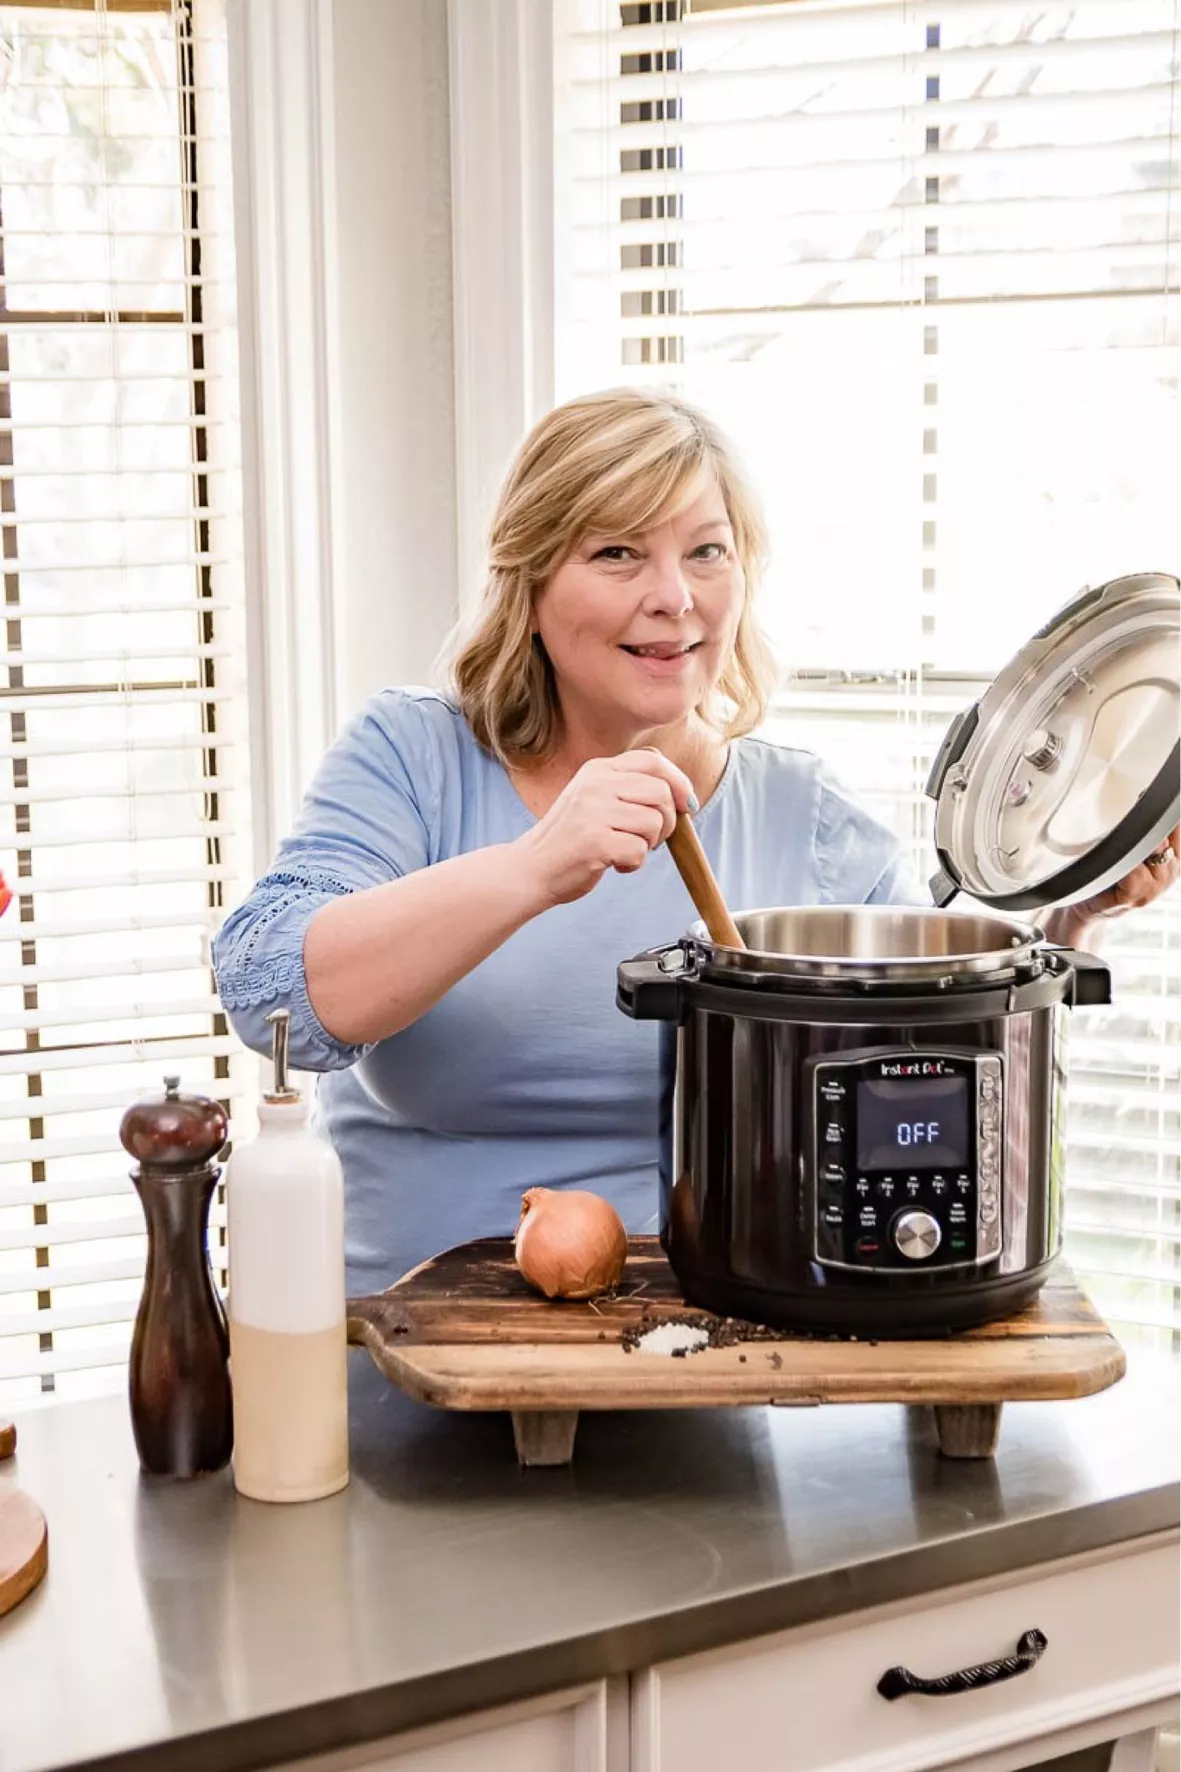  Instant Pot Duo 7-in-1 Electric Pressure Cooker